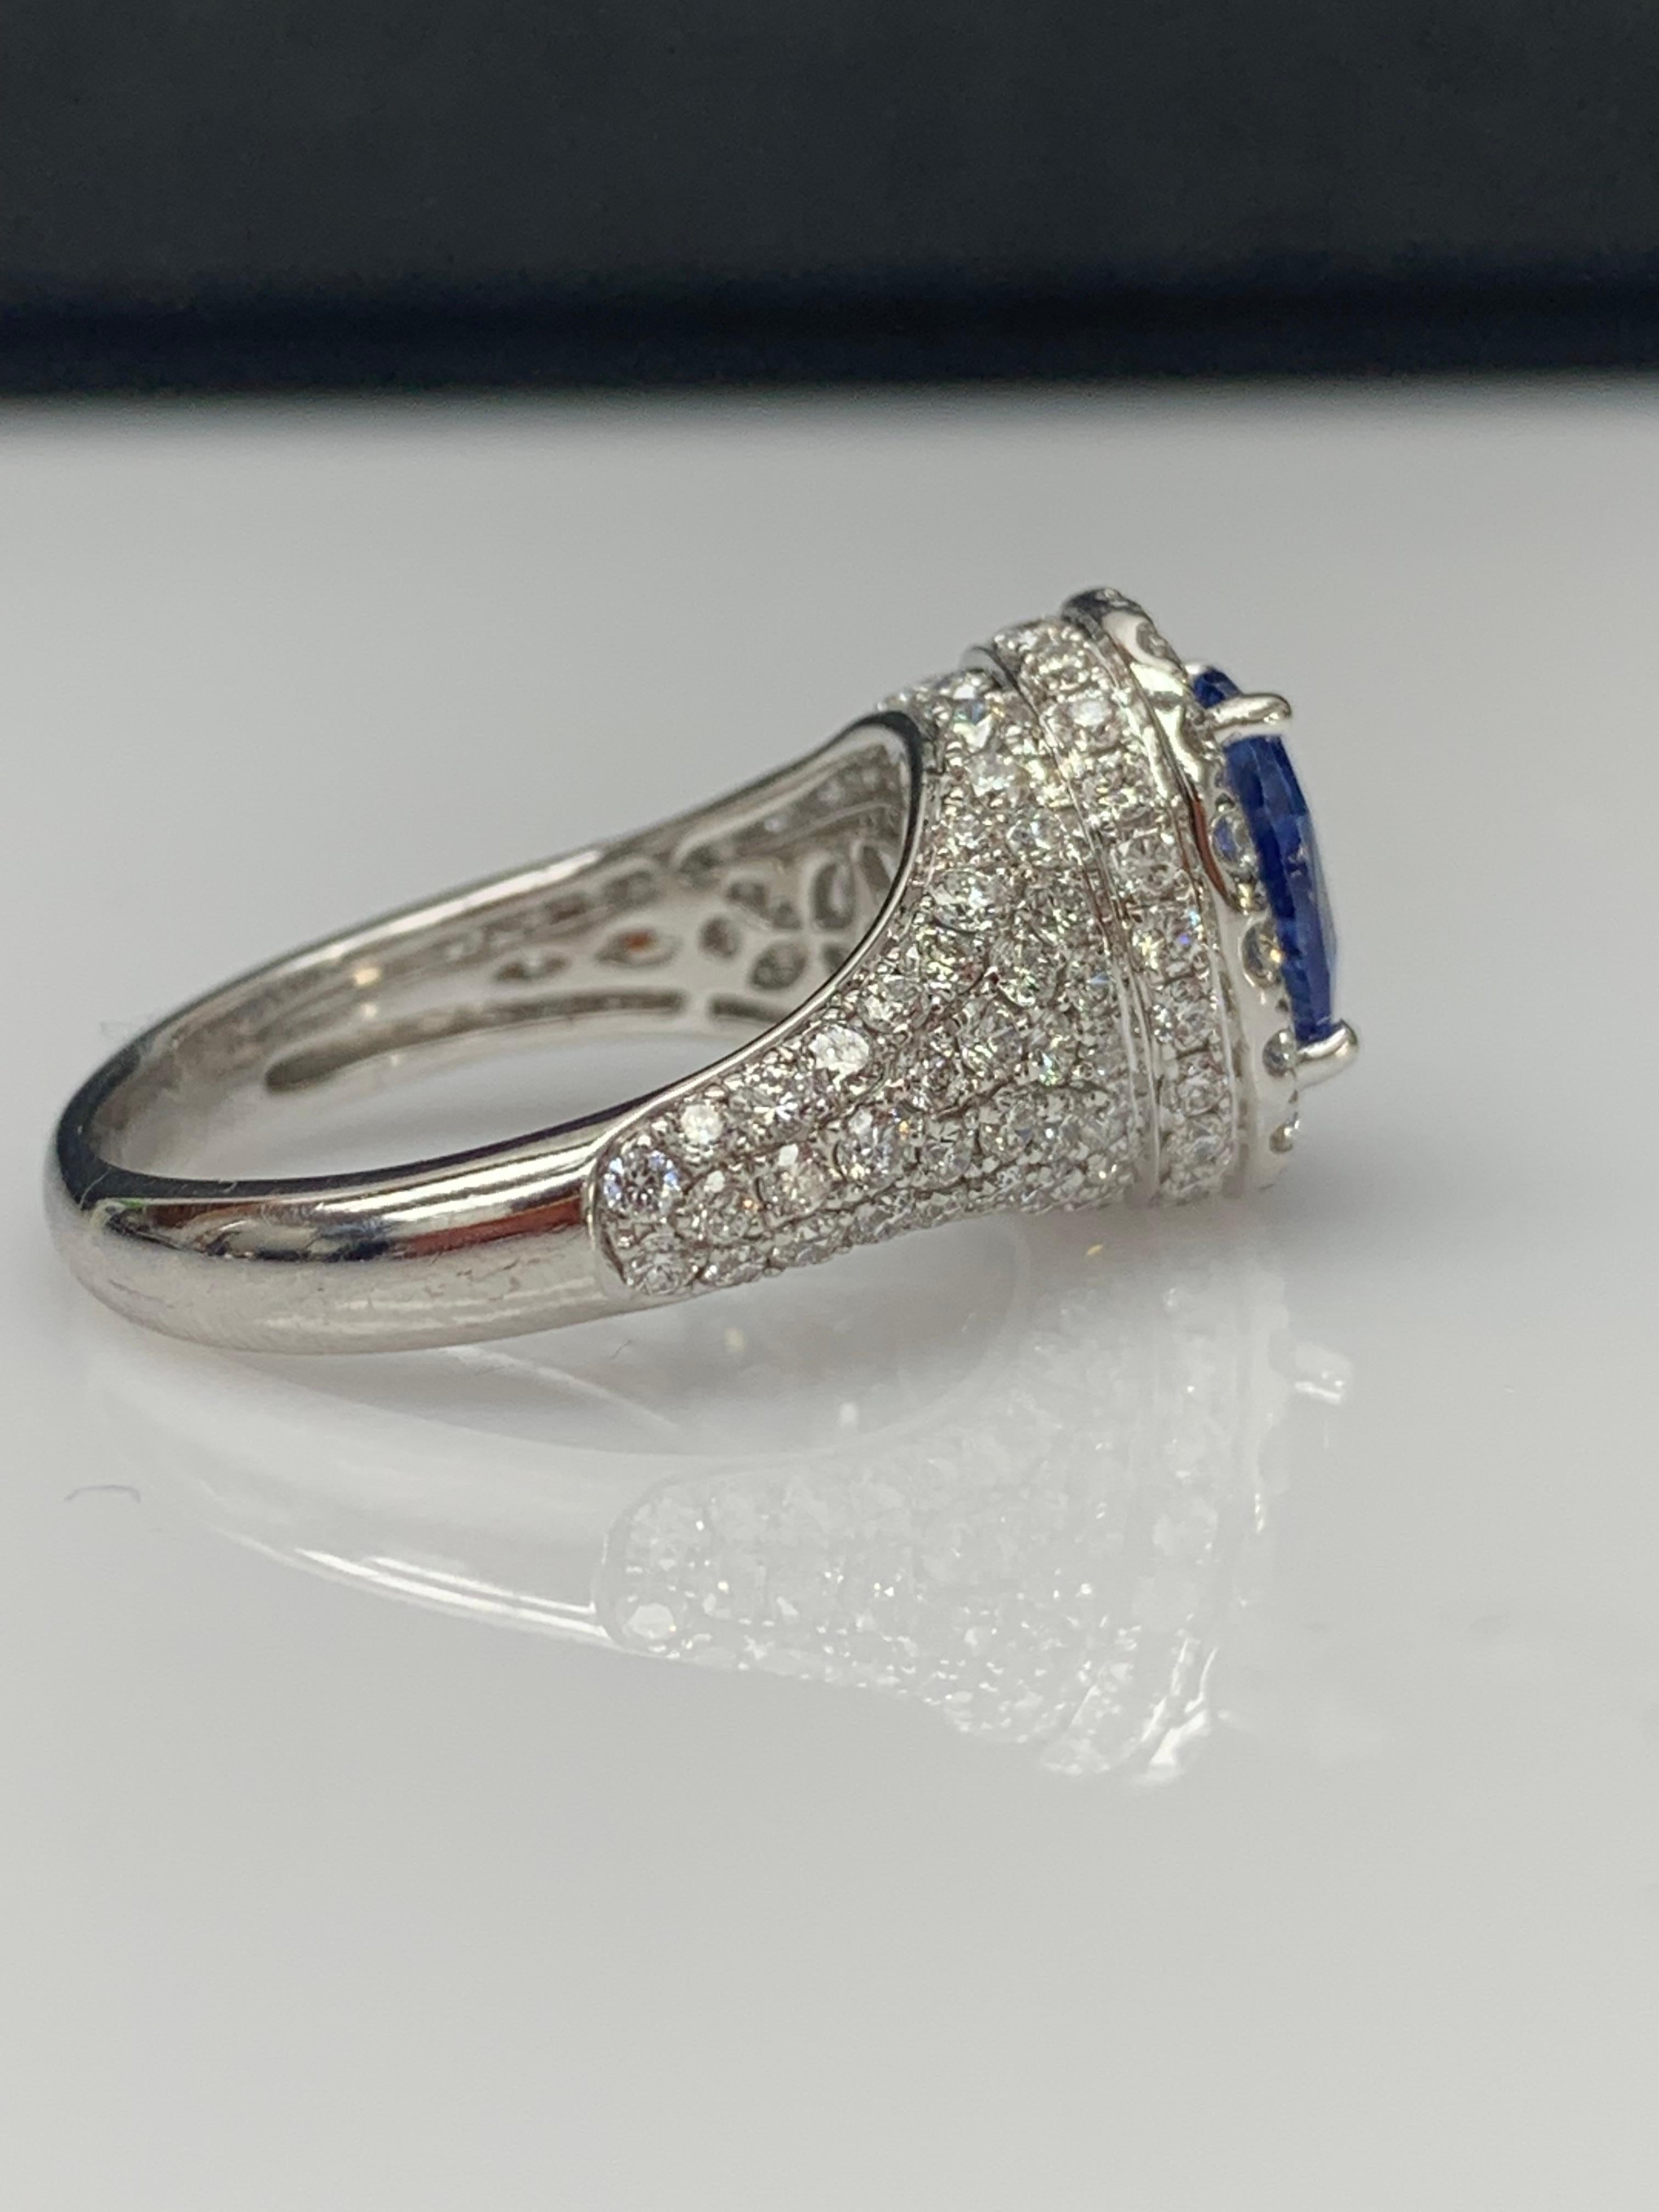 1.27 Carat Oval Cut Blue Sapphire and Diamond Fashion Ring in 18K White Gold For Sale 3